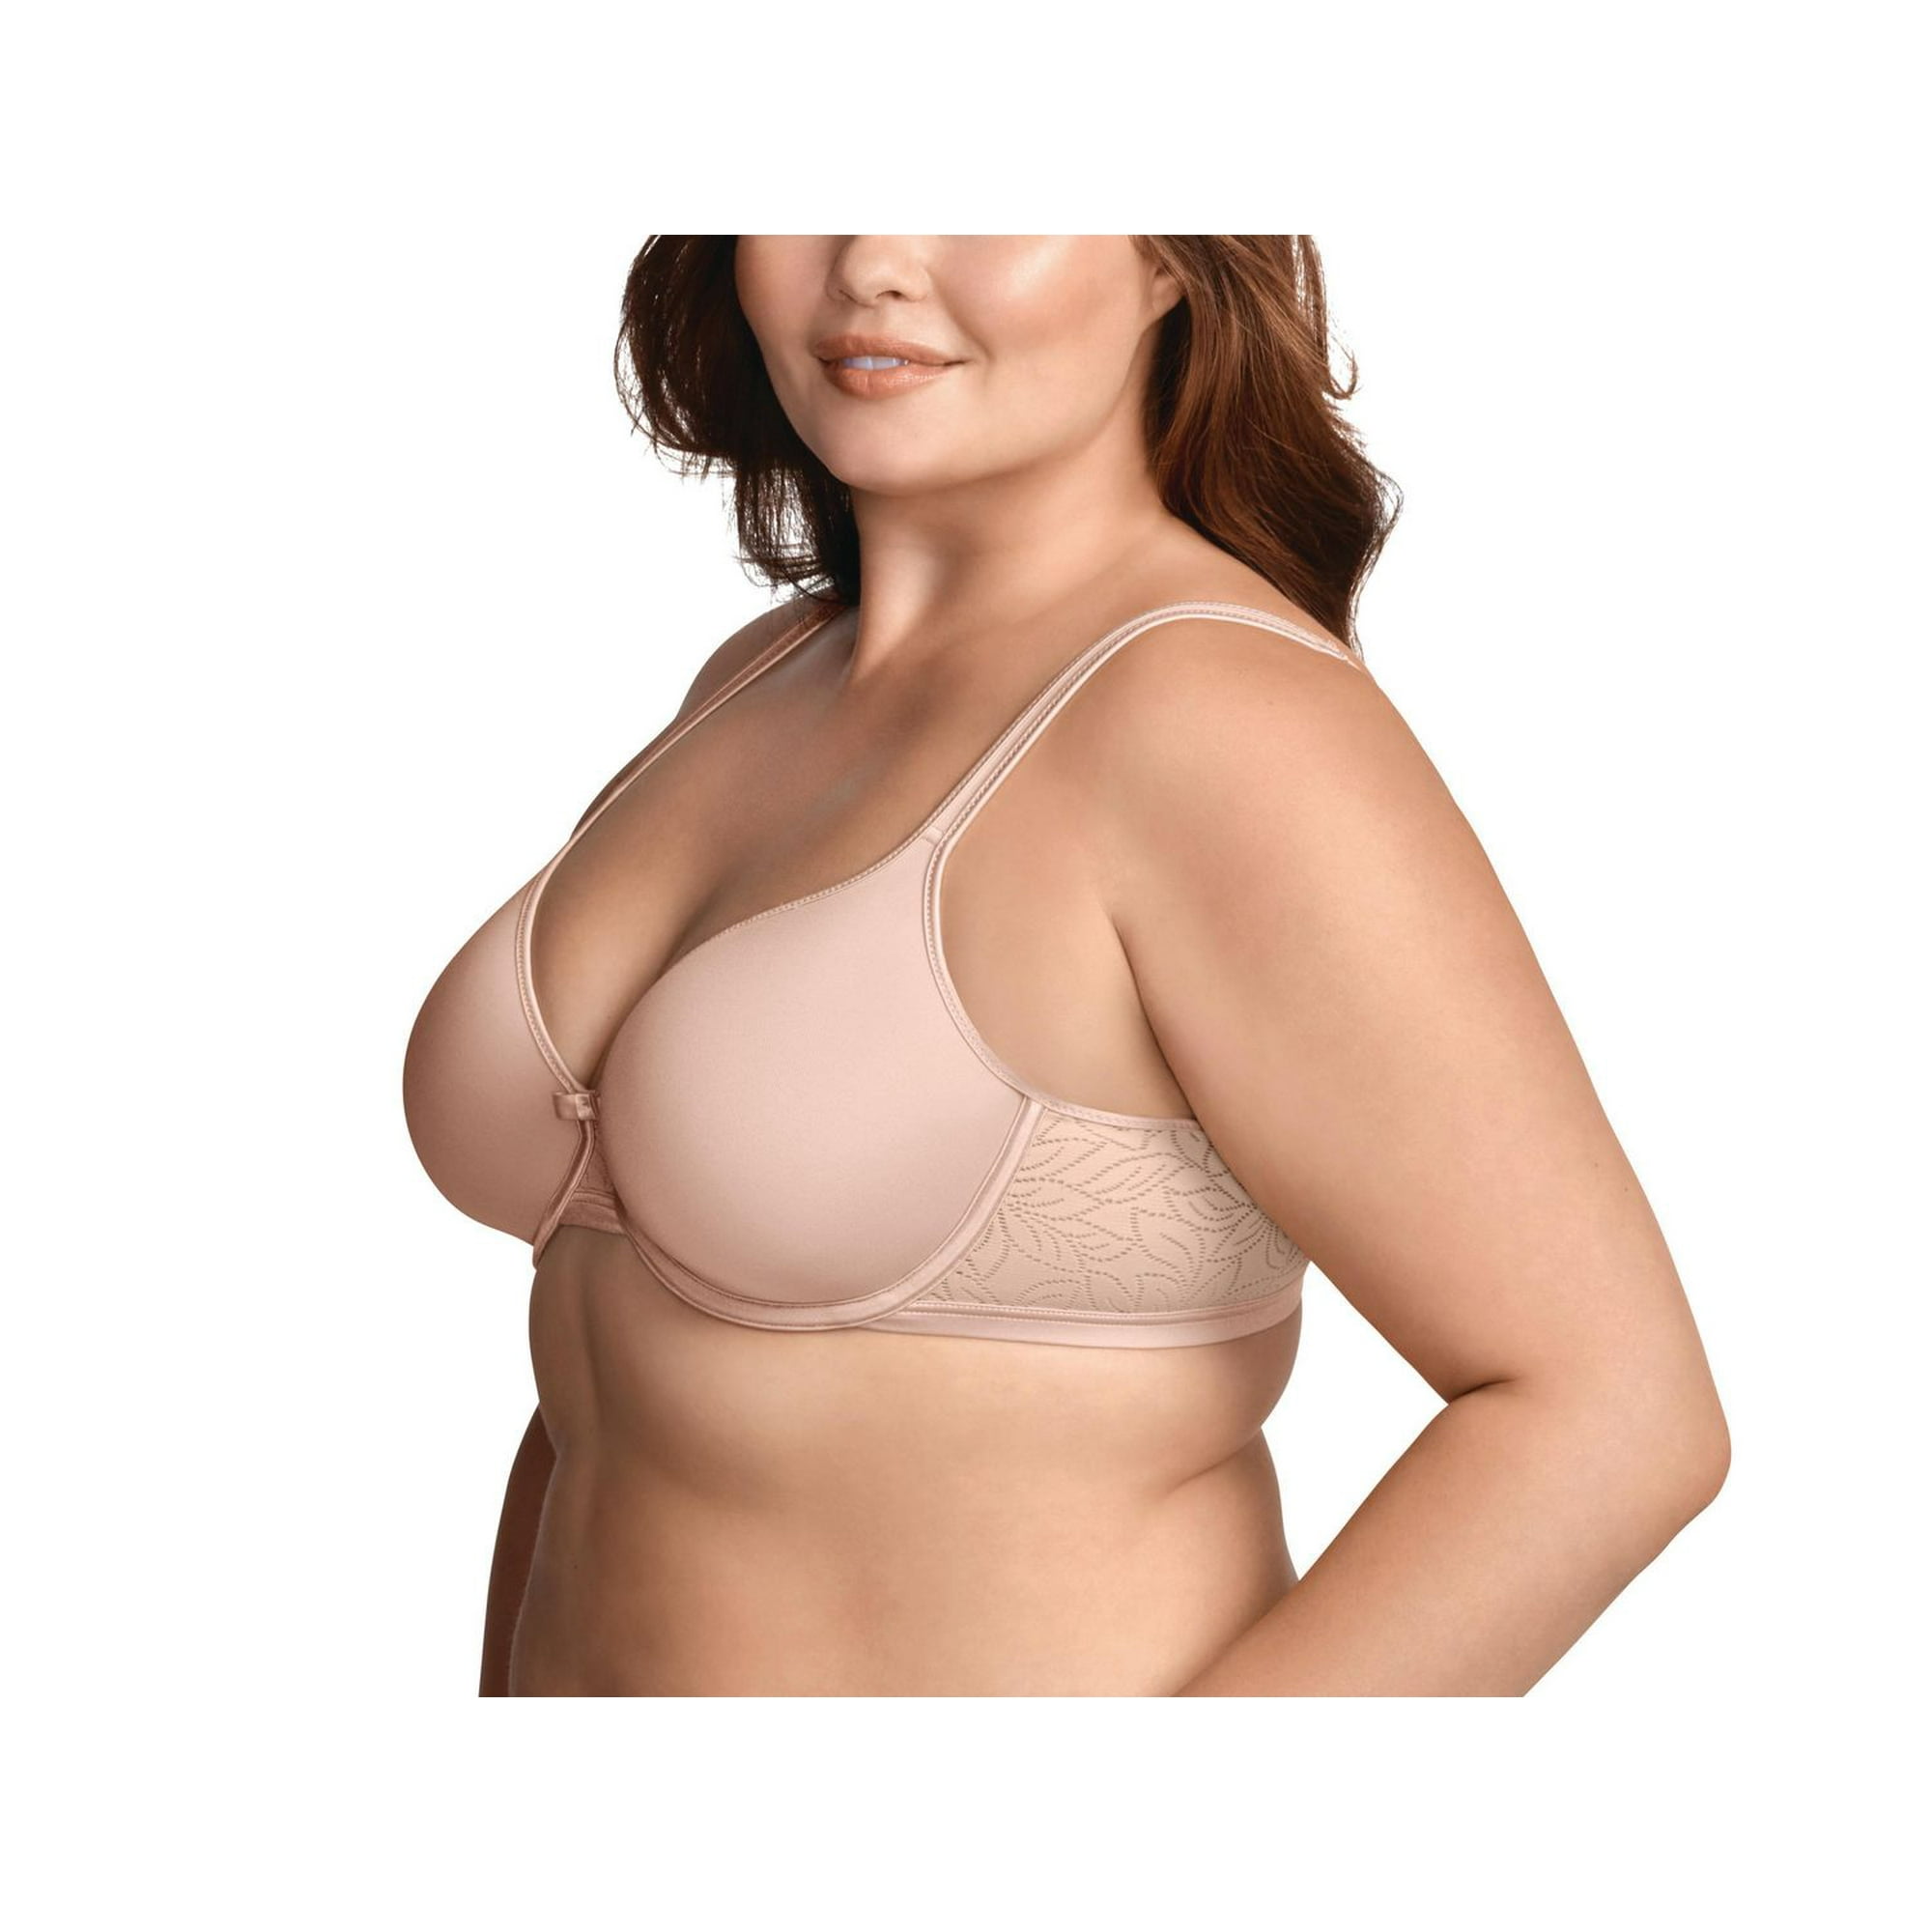 WonderBra Canada - Our Plus size style 1934 offers it all